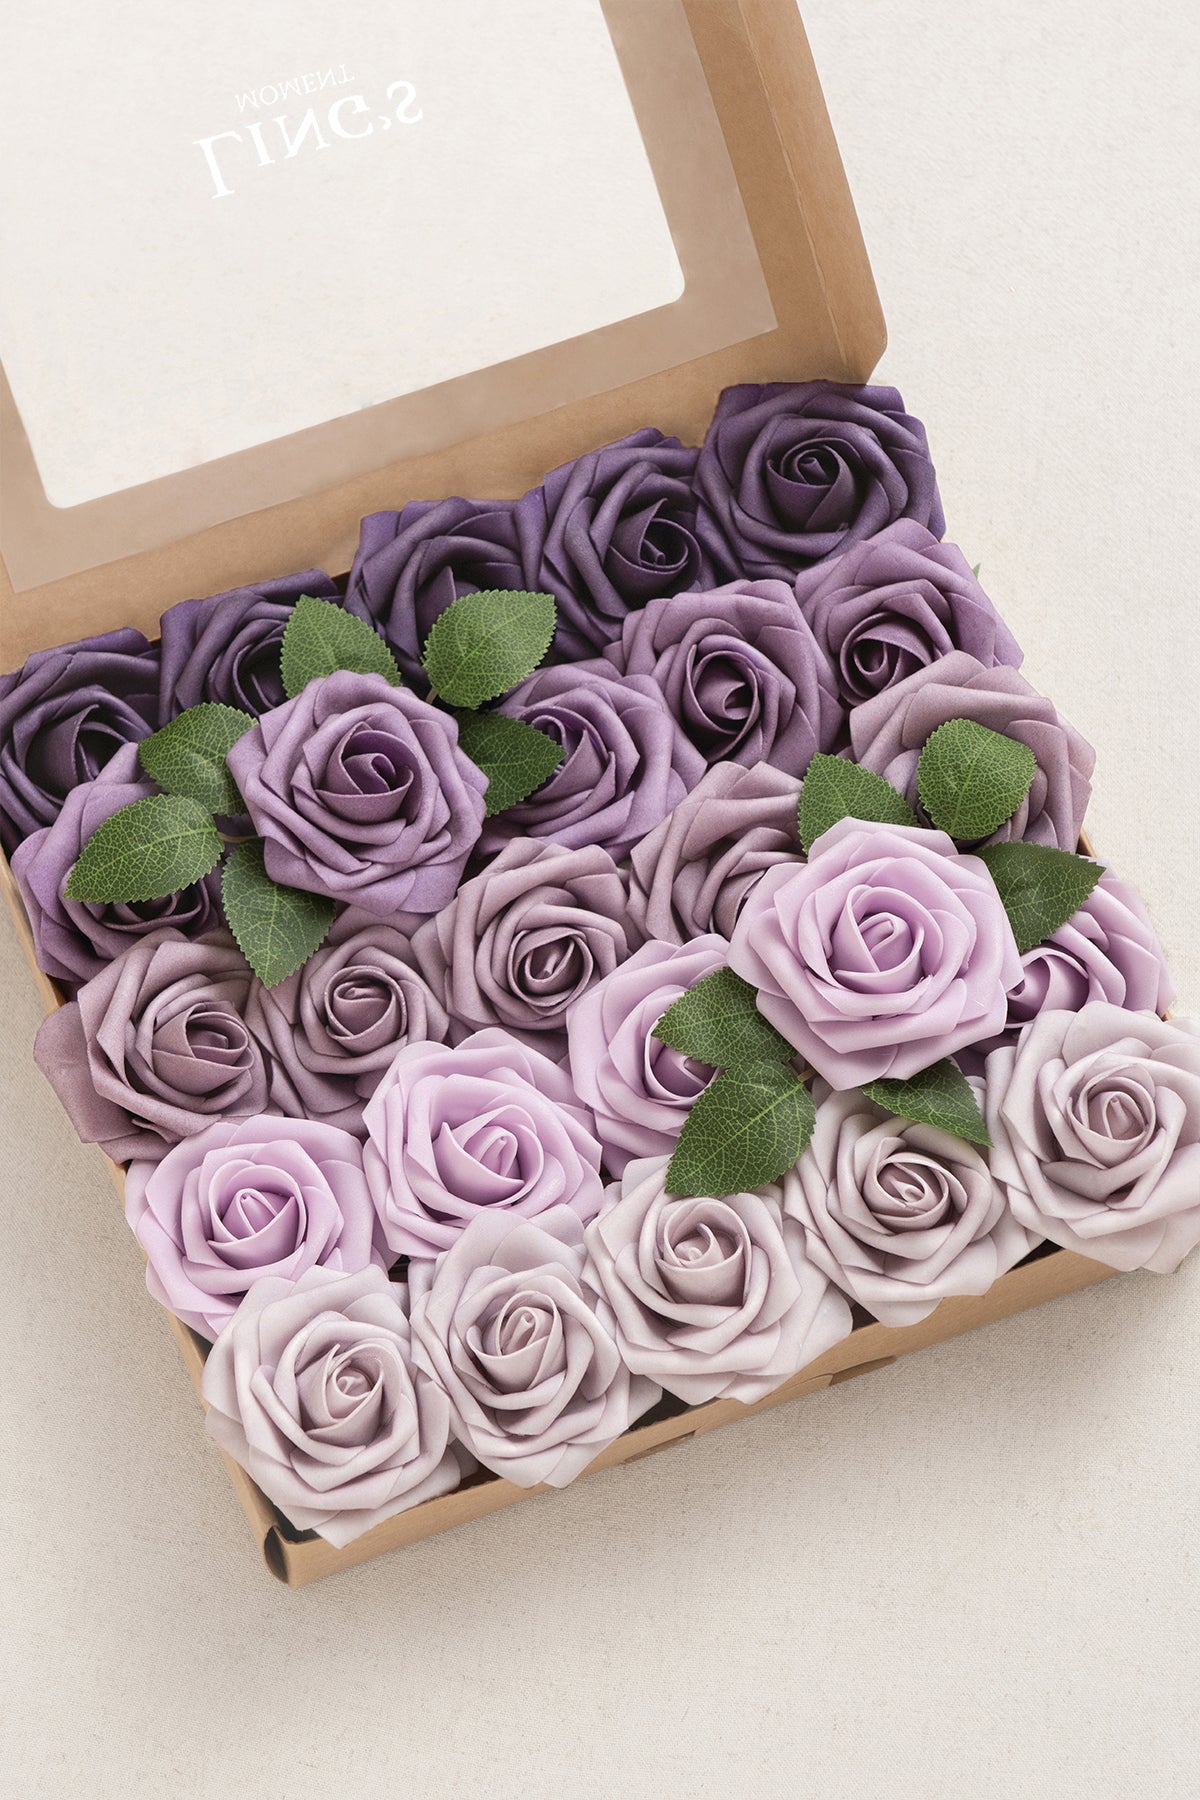 DIY Supporting Flower Boxes in Lilac & Gold